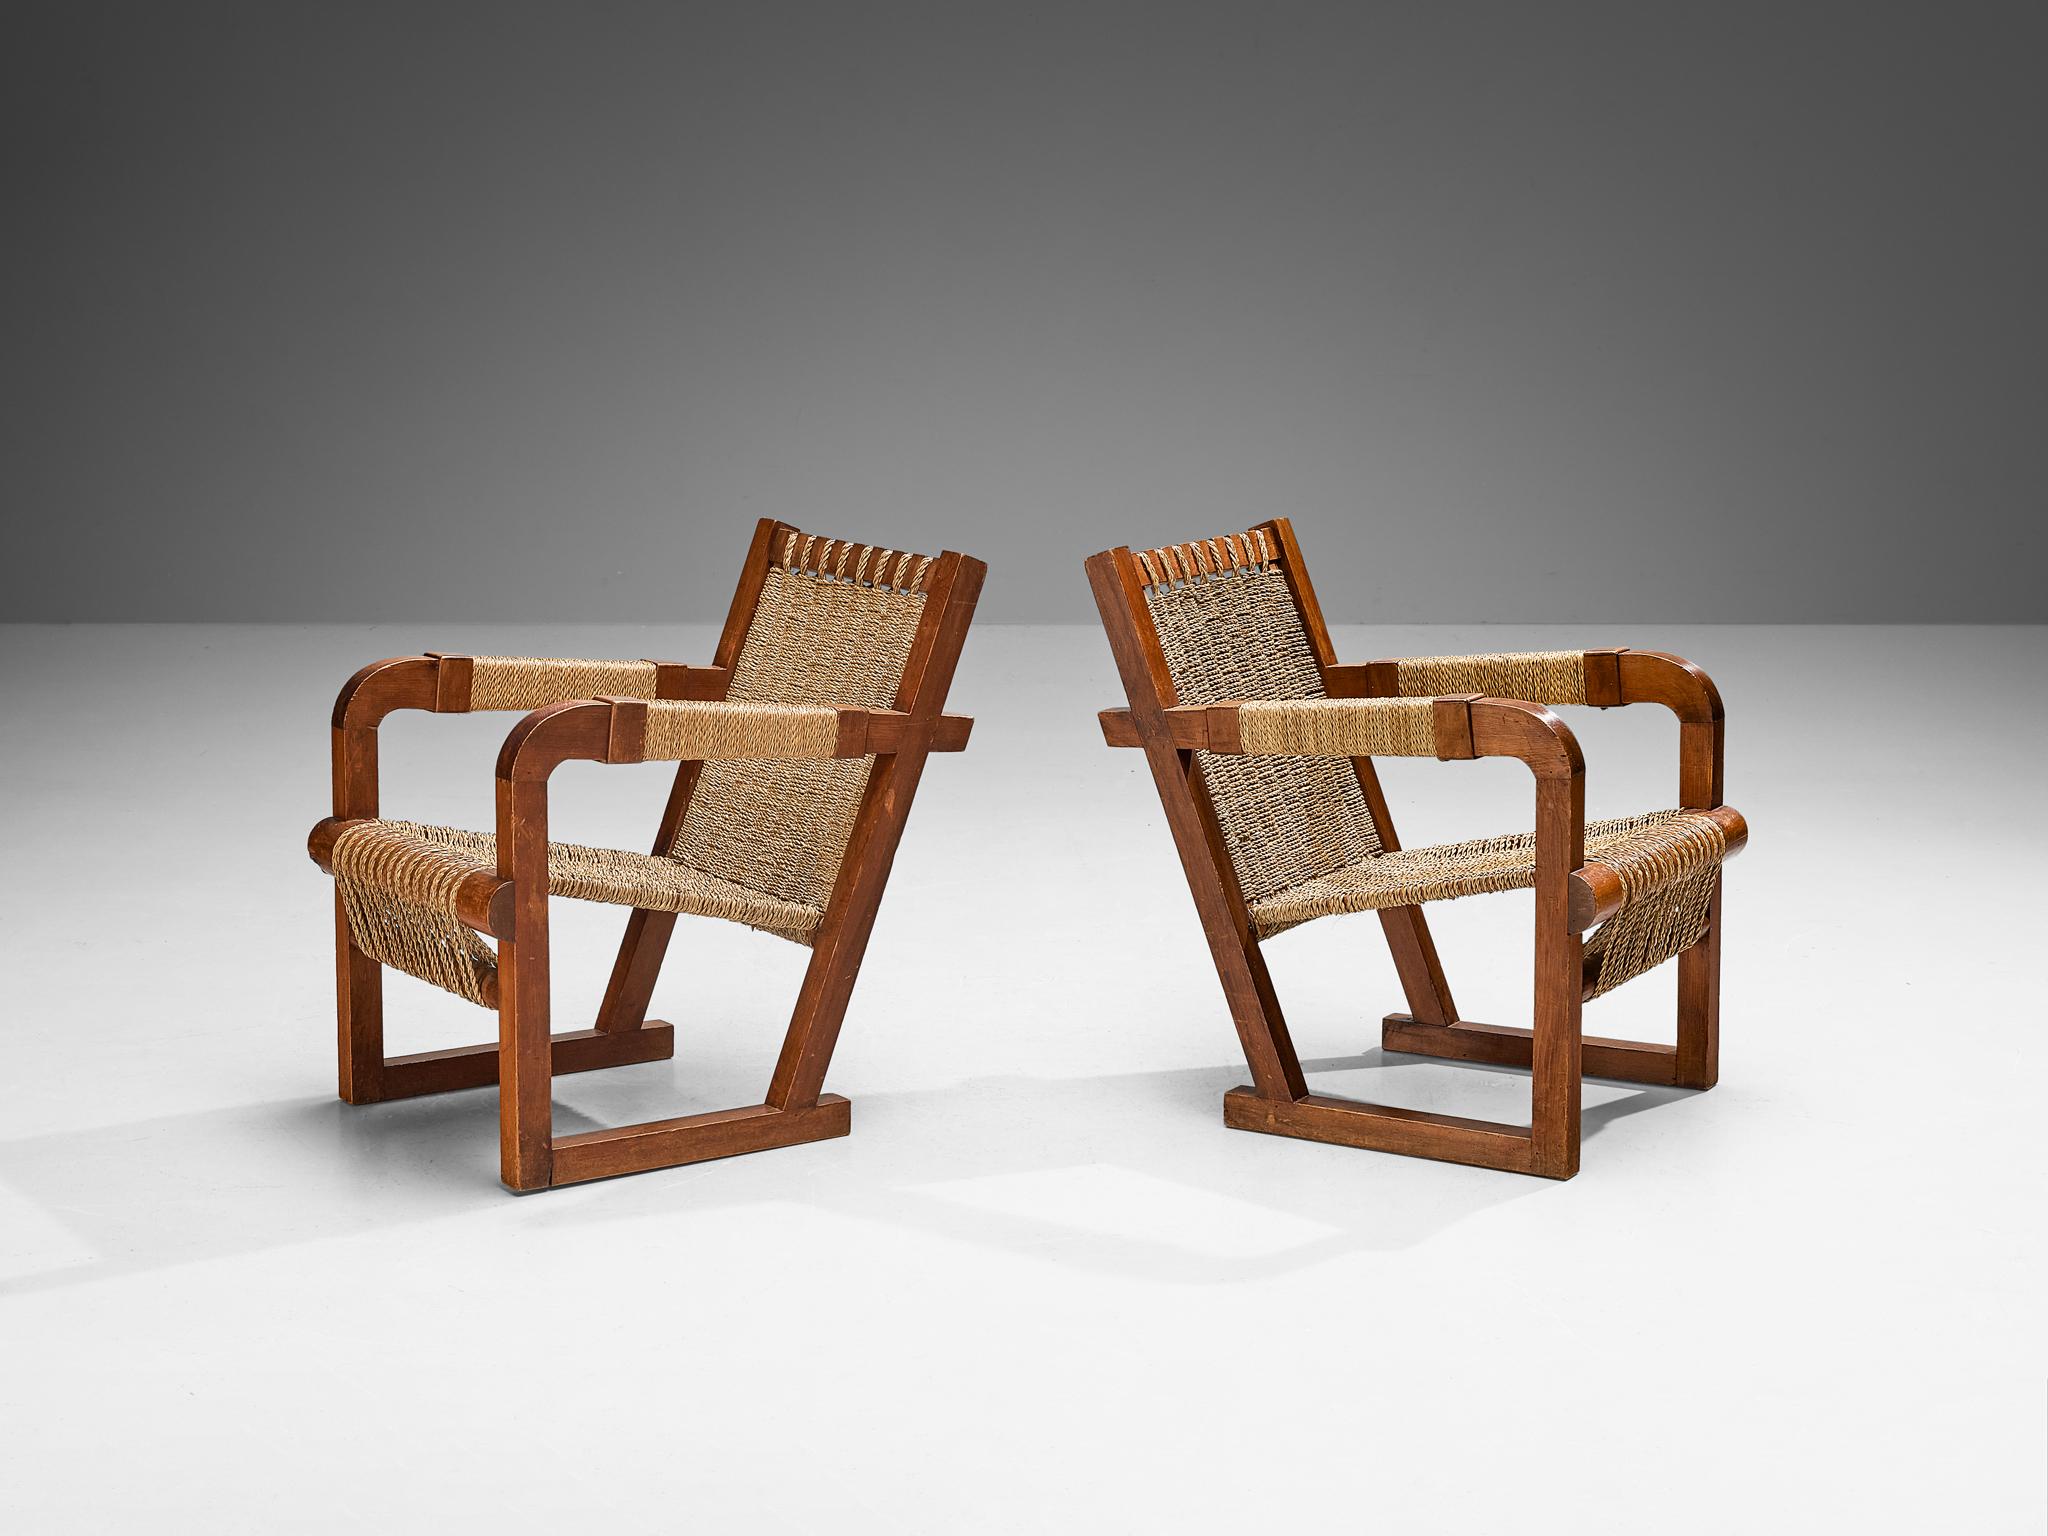 Francis Jourdain, pair of lounge chairs, dark stained pine, straw, France, 1930s

Crafted around 1930 in France, these exquisite armchairs were designed by Francis Jourdain. The chairs feature a gracefully inclined back, and the seat is skillfully